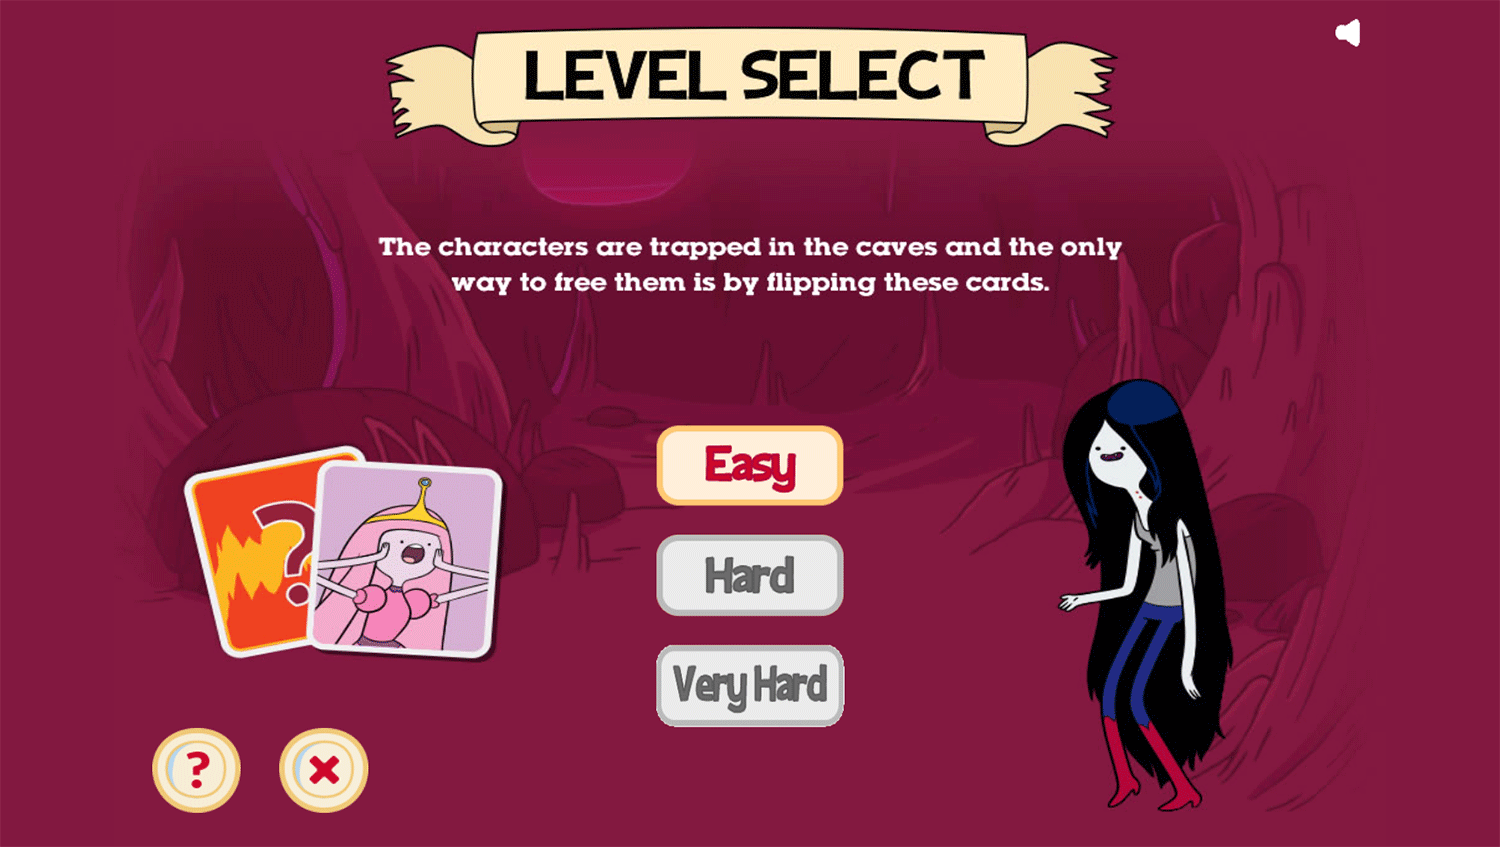 Adventure Time Fangs for the Memories Game Level Select Screenshot.